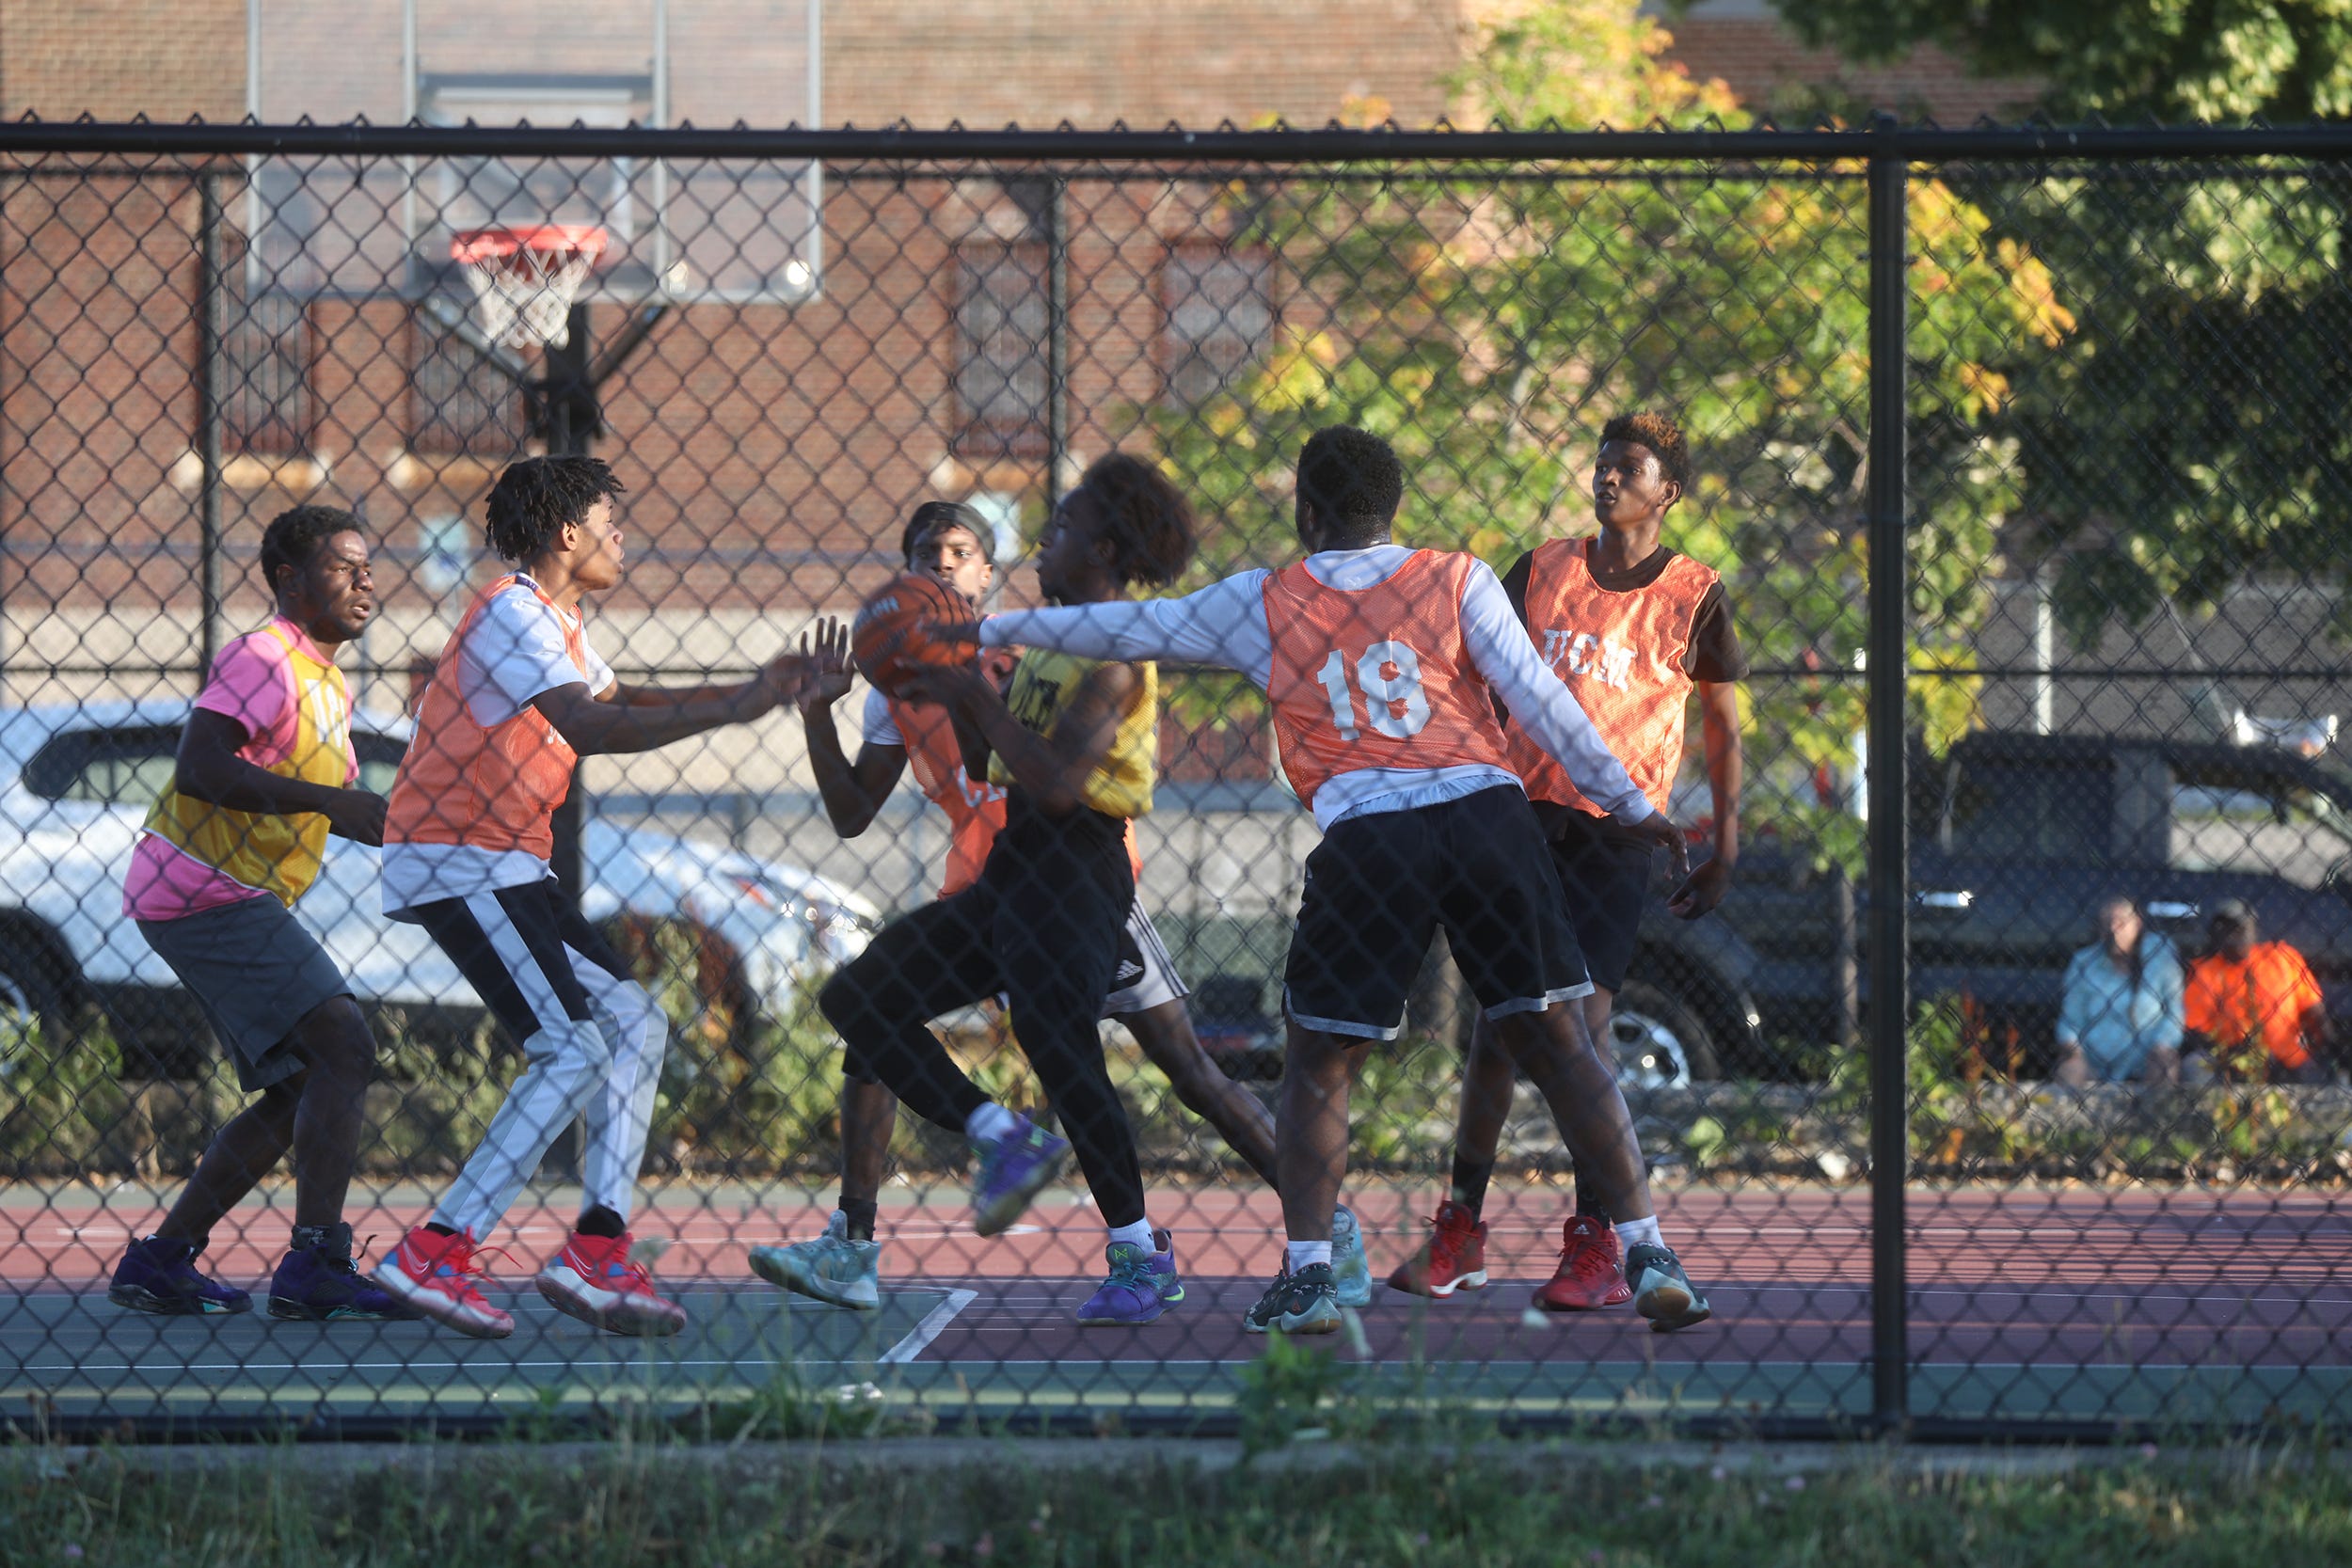 Master Park in Buffalo, NY was busy with a basketball game and children doing football drills on Saturday, July 26, 2022.